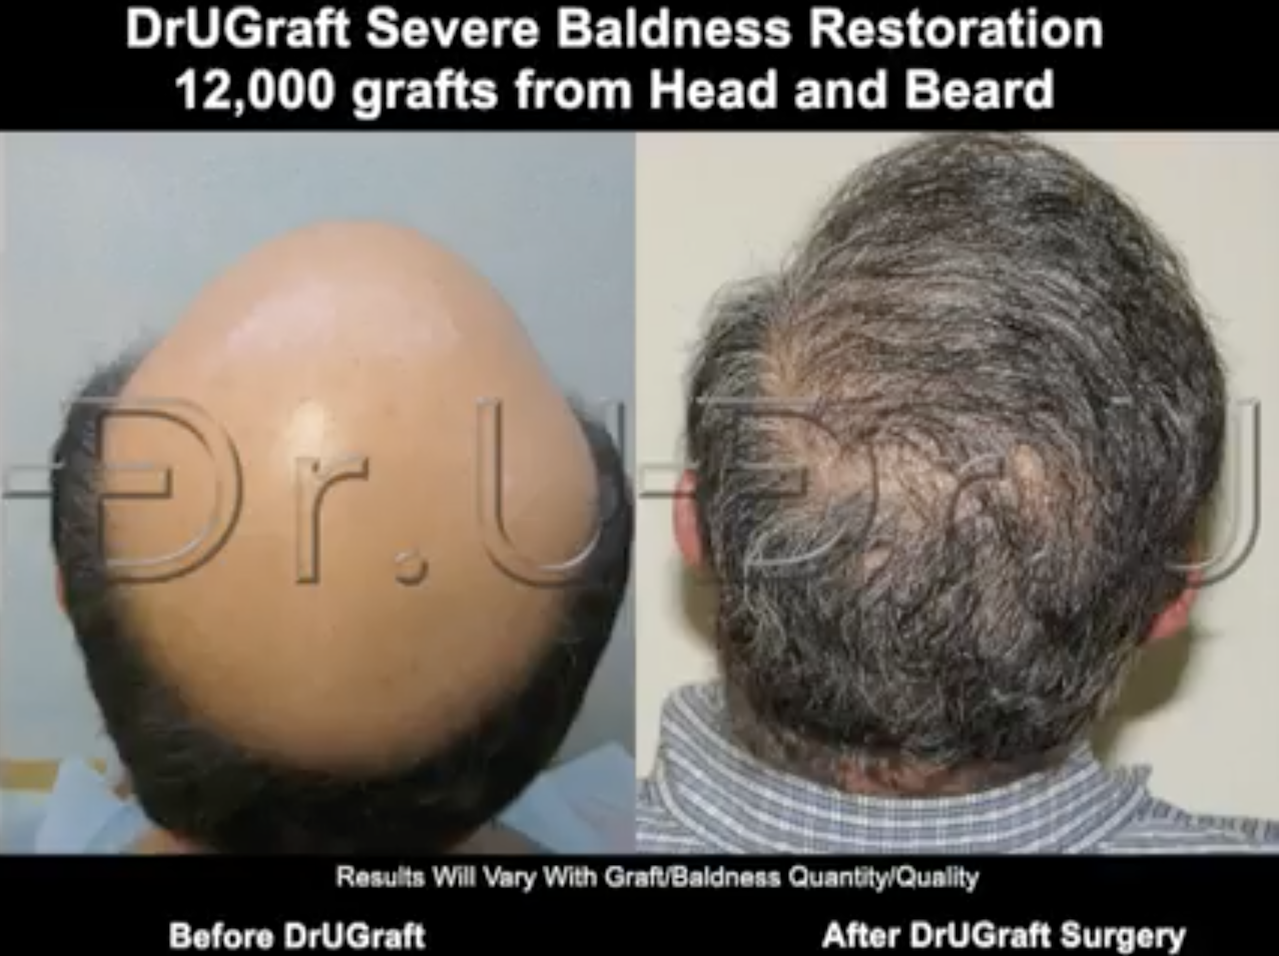 This severely bald patient benefited from a Dr.UGraft™ procedure using 12,000 grafts from the head and beard.